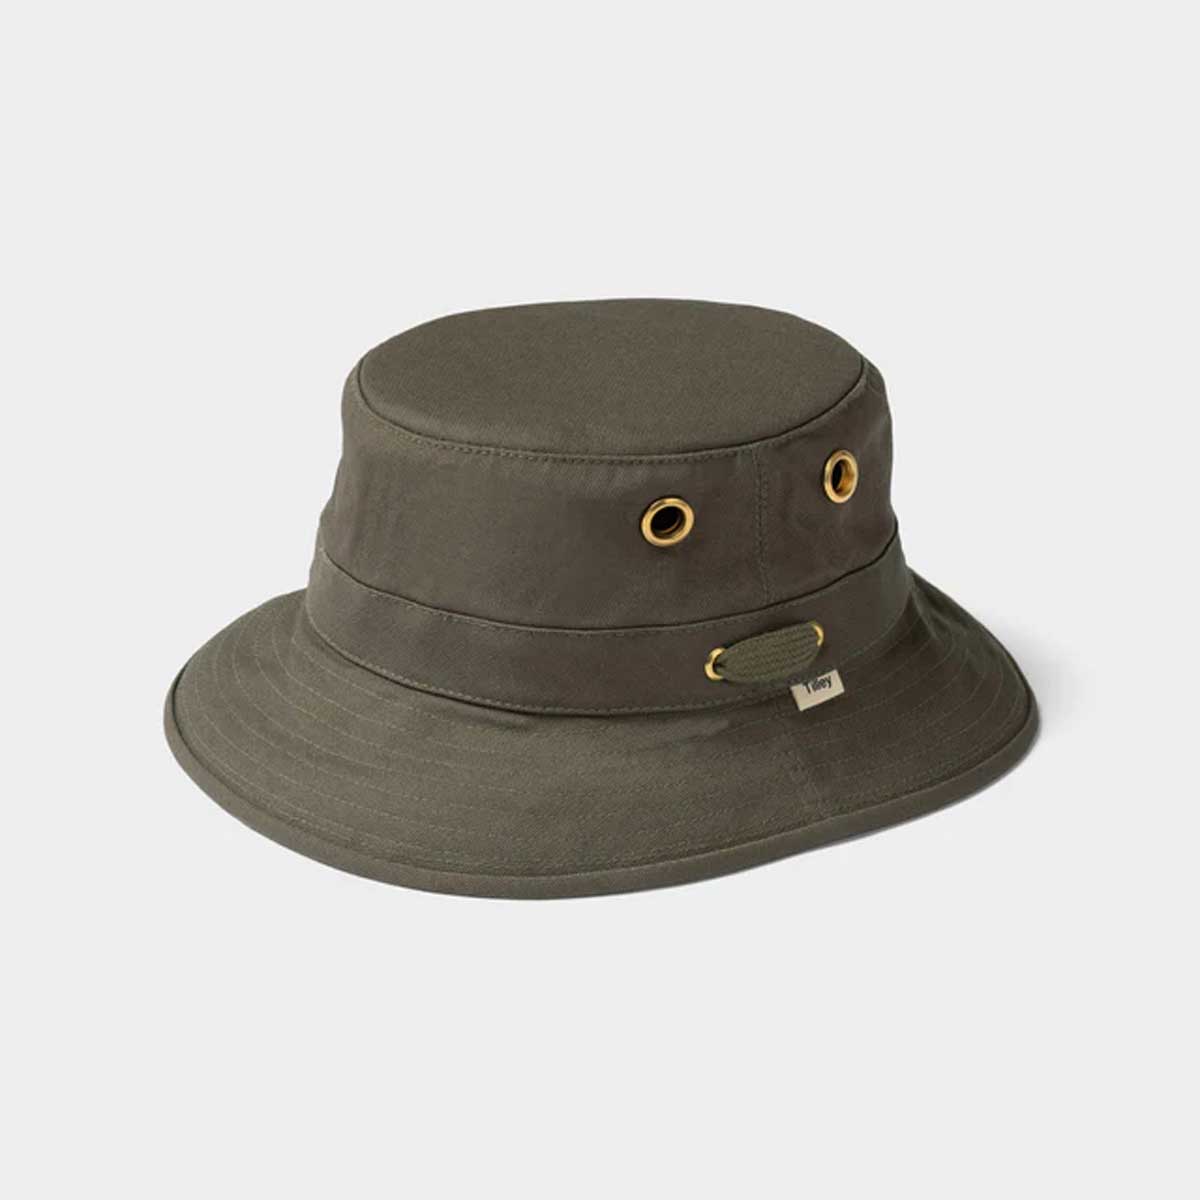 TILLEY Iconic T1 Bucket Hat - Olive